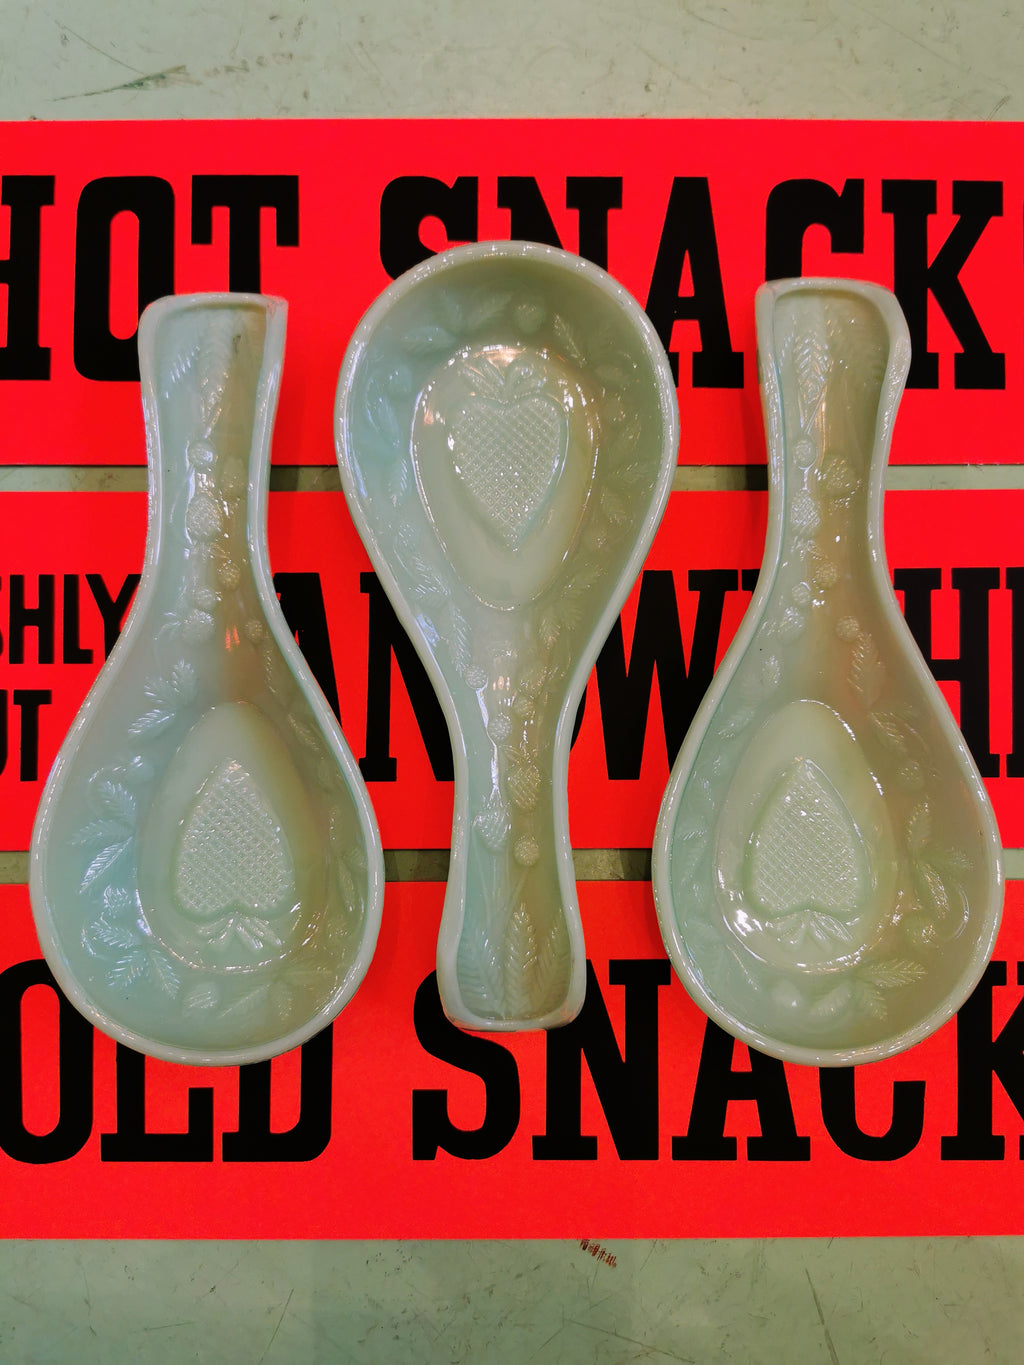 Gorgeous milky green vintage style spoon rest, with lovely folky pressed glass details. Protect your kitchen surfaces from those pesky hot sticky stirrers!! 

Dishwasher safe

21cm x 9cm x 3cm

